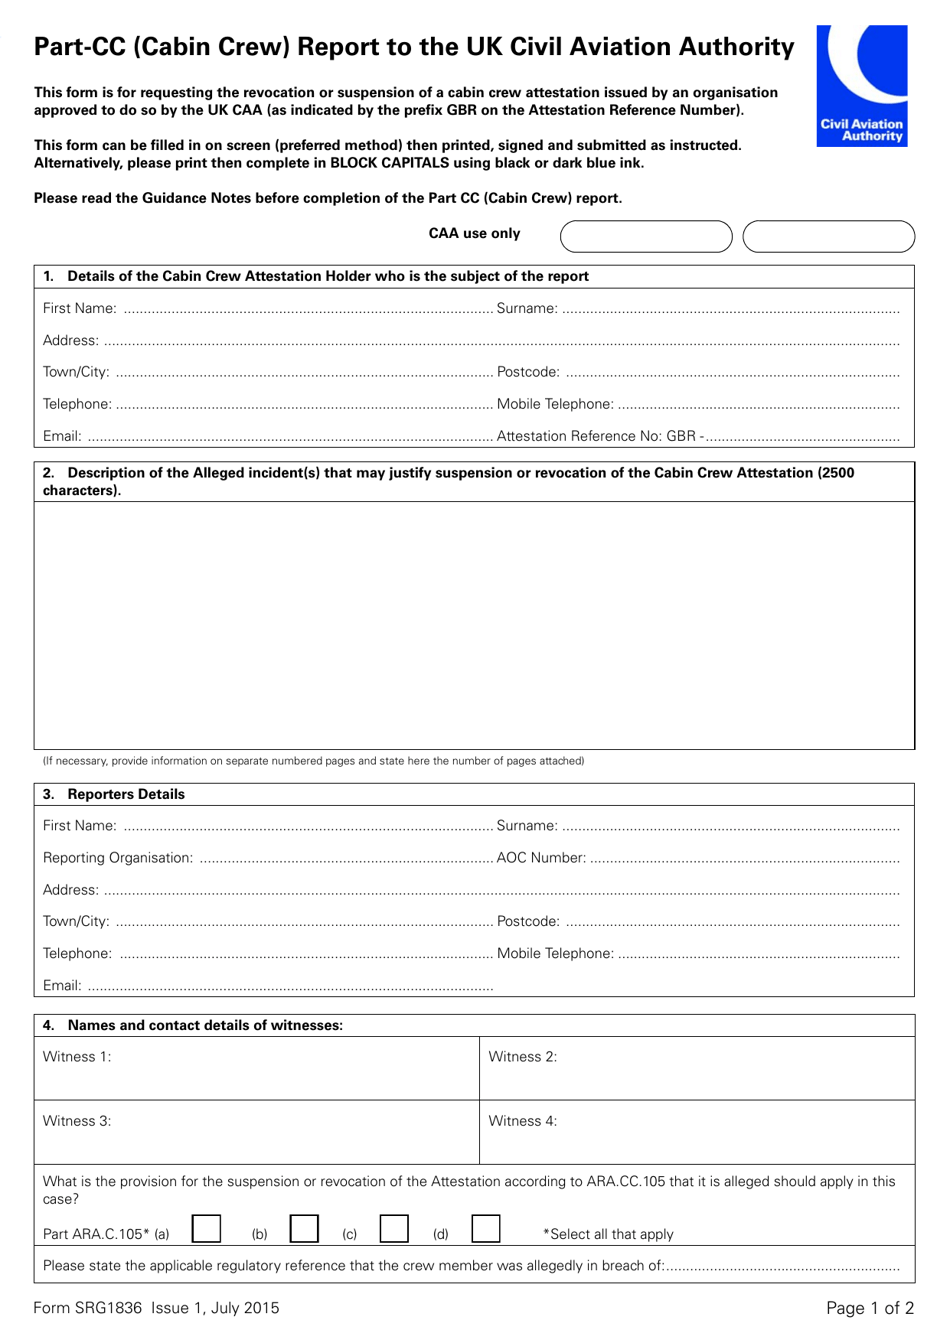 Form SRG1836 Part-Cc (Cabin Crew) Report to the UK Civil Aviation Authority - United Kingdom, Page 1